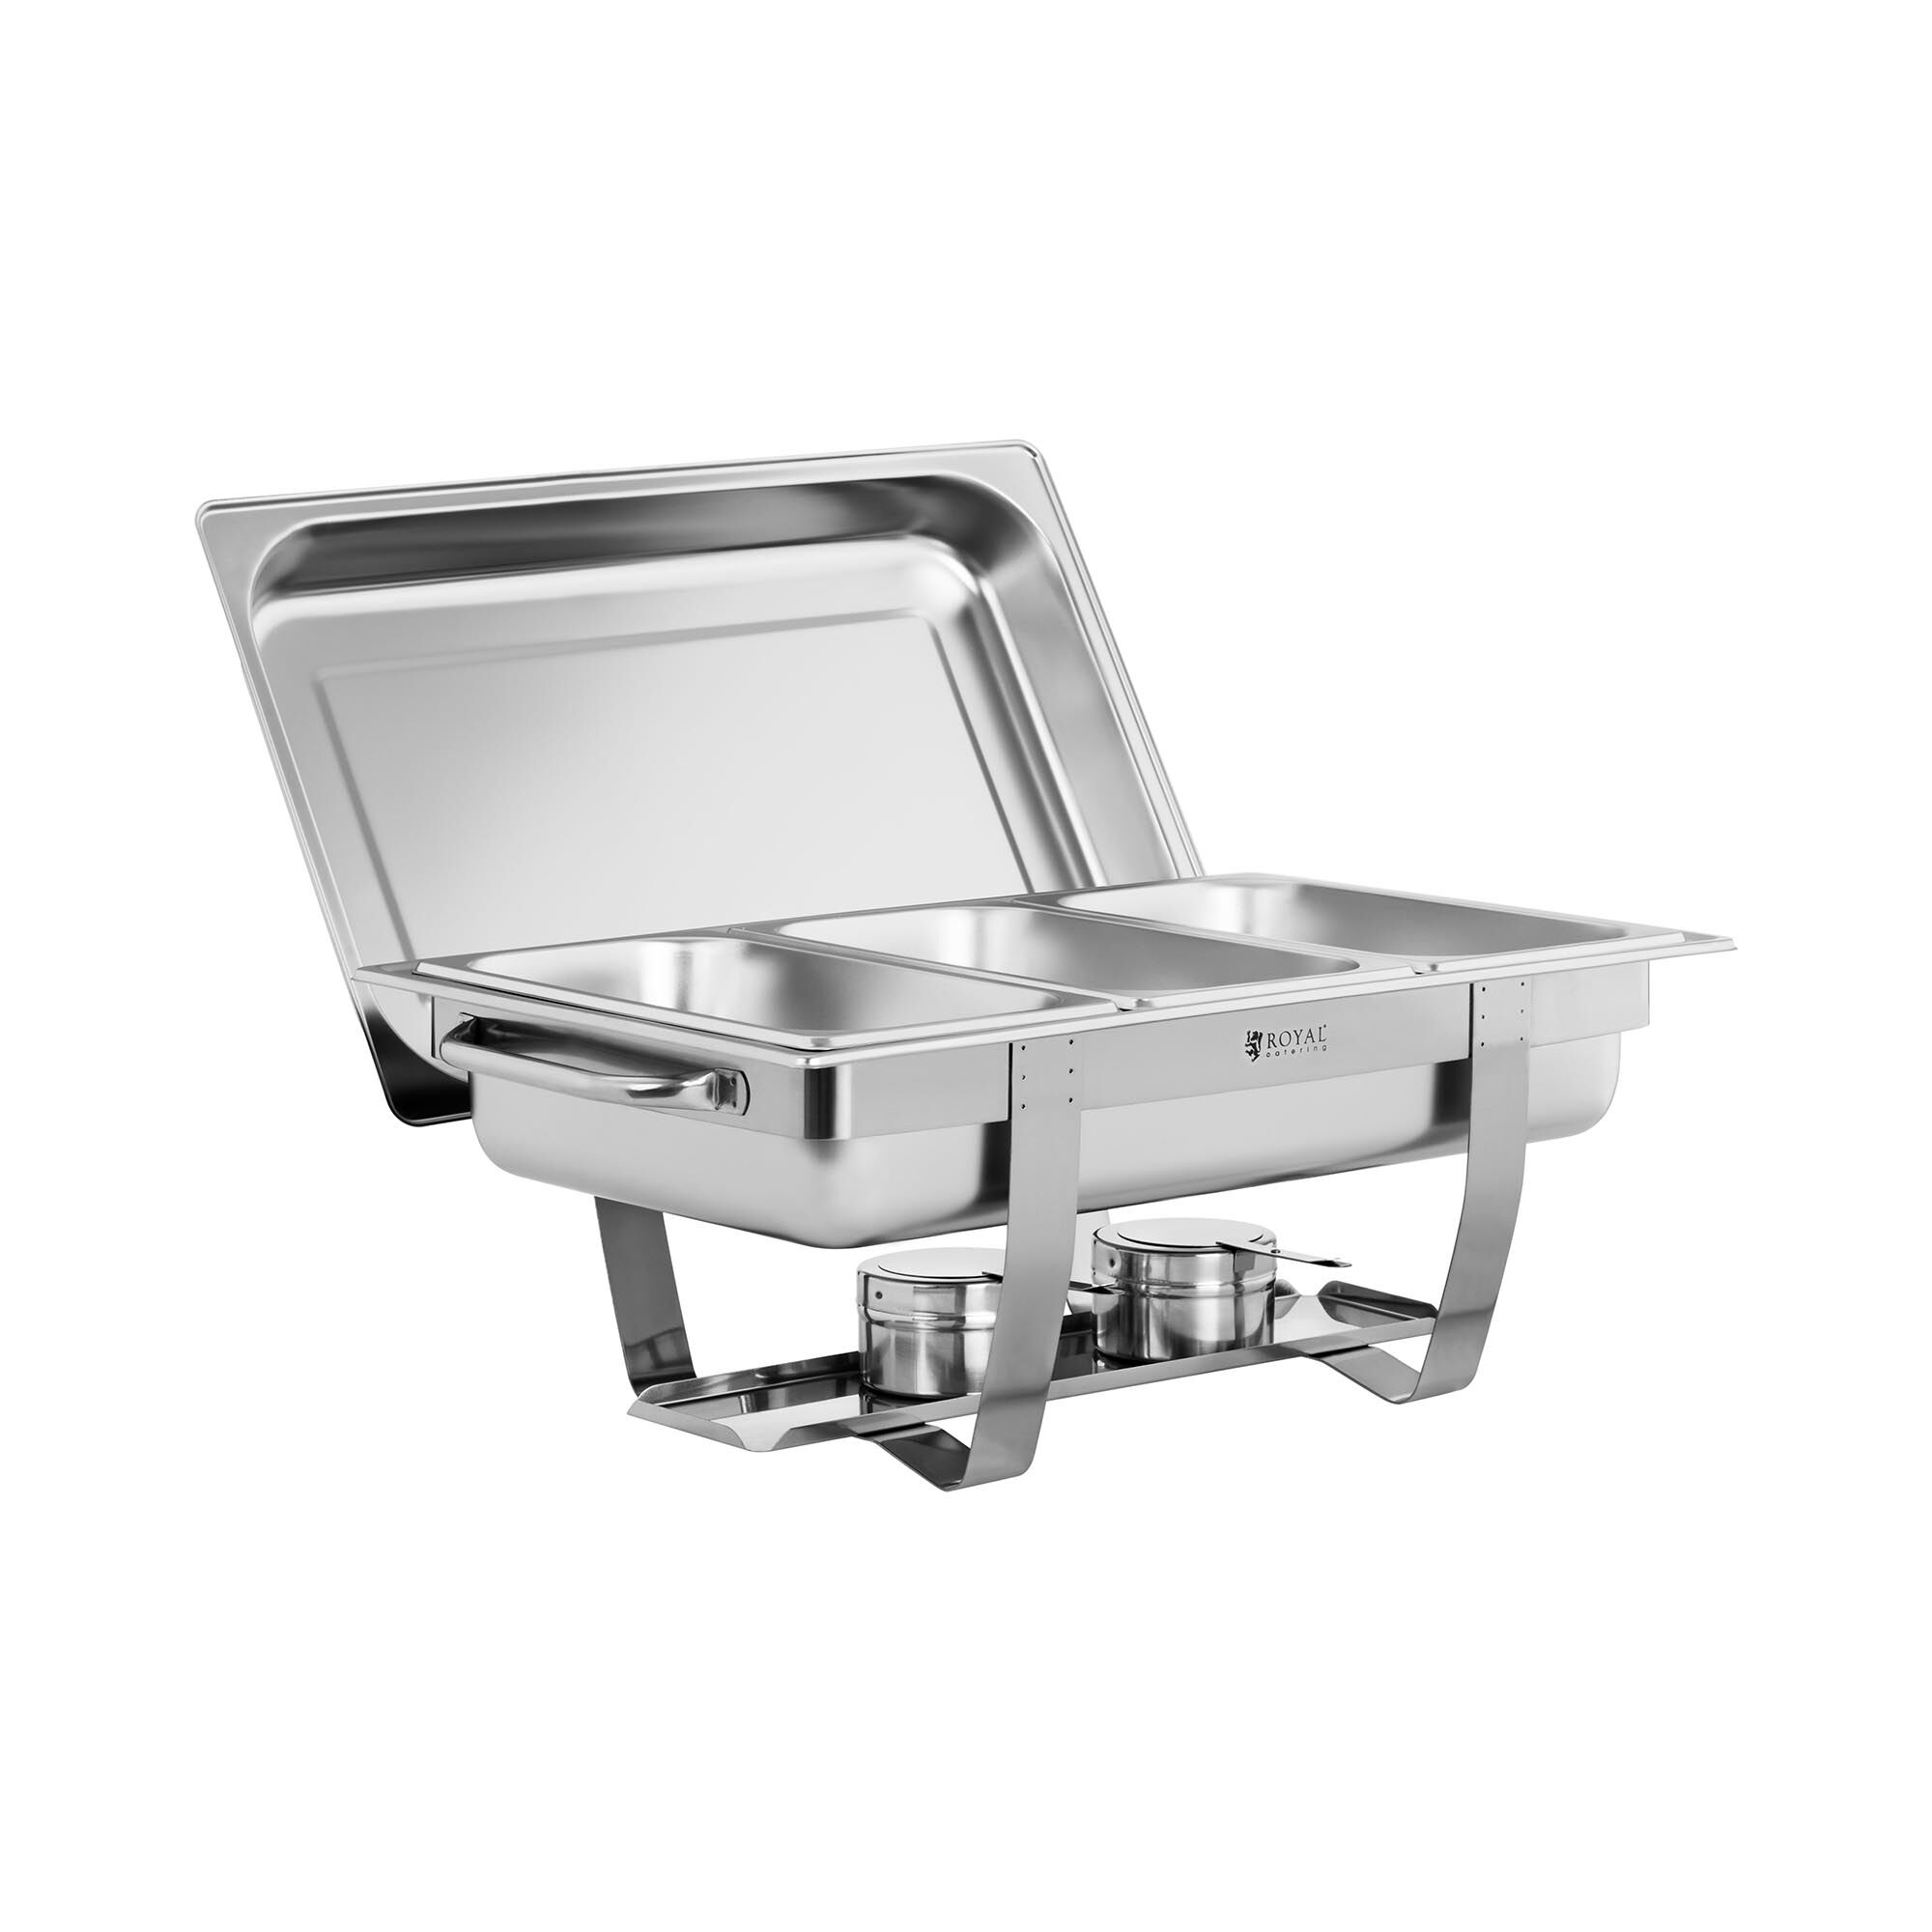 Royal Catering Chafing Dish - 3 x GN 1/3 - 7 L - 2 brandstofcontainers 10011372